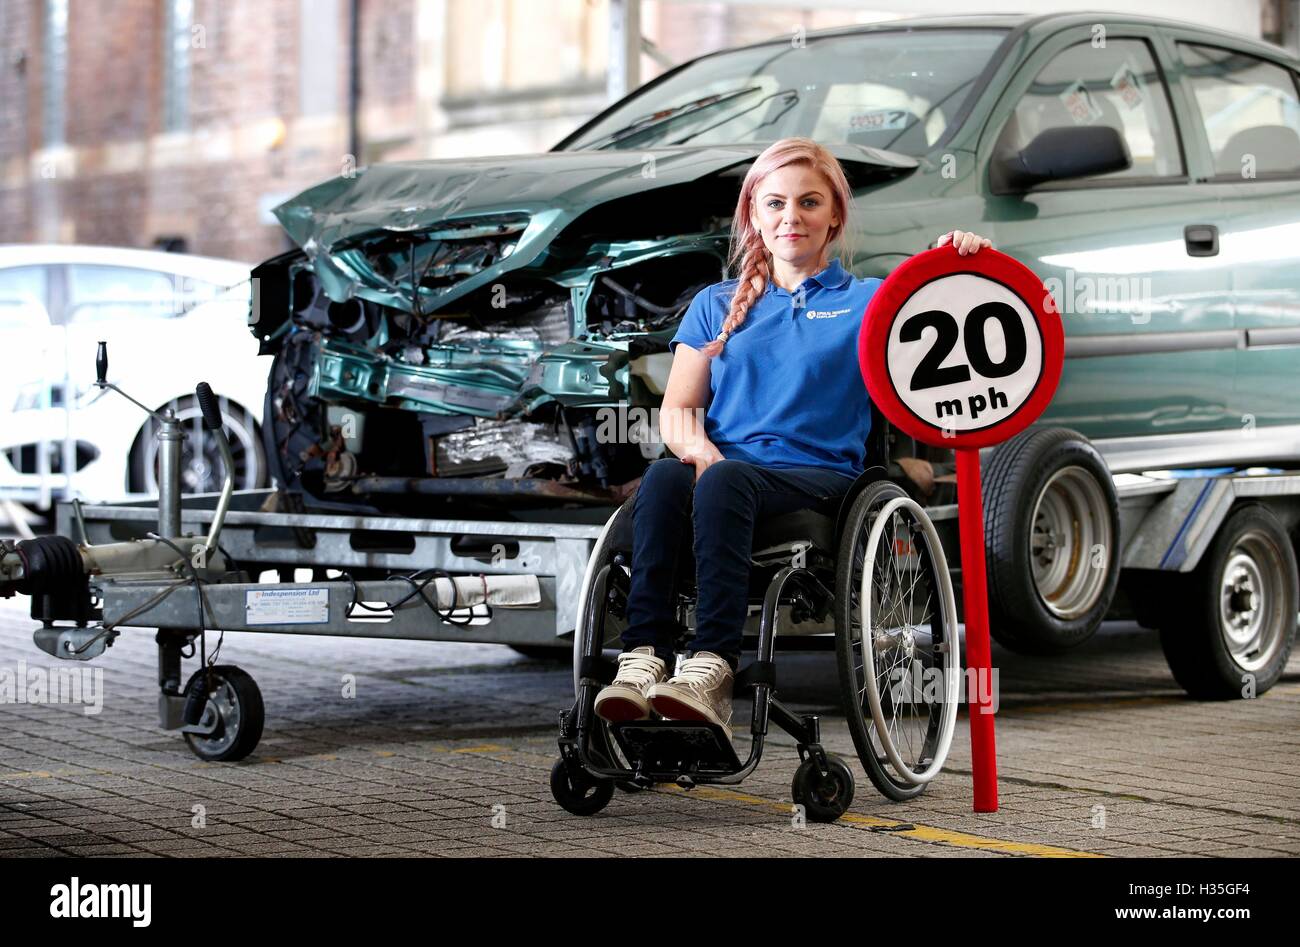 Crash survivor Laura Torrance, 33, shared her experiences to highlight road safety at Streets Ahead Edinburgh Young Drivers, a multi-agency road safety education event in Edinburgh. Stock Photo